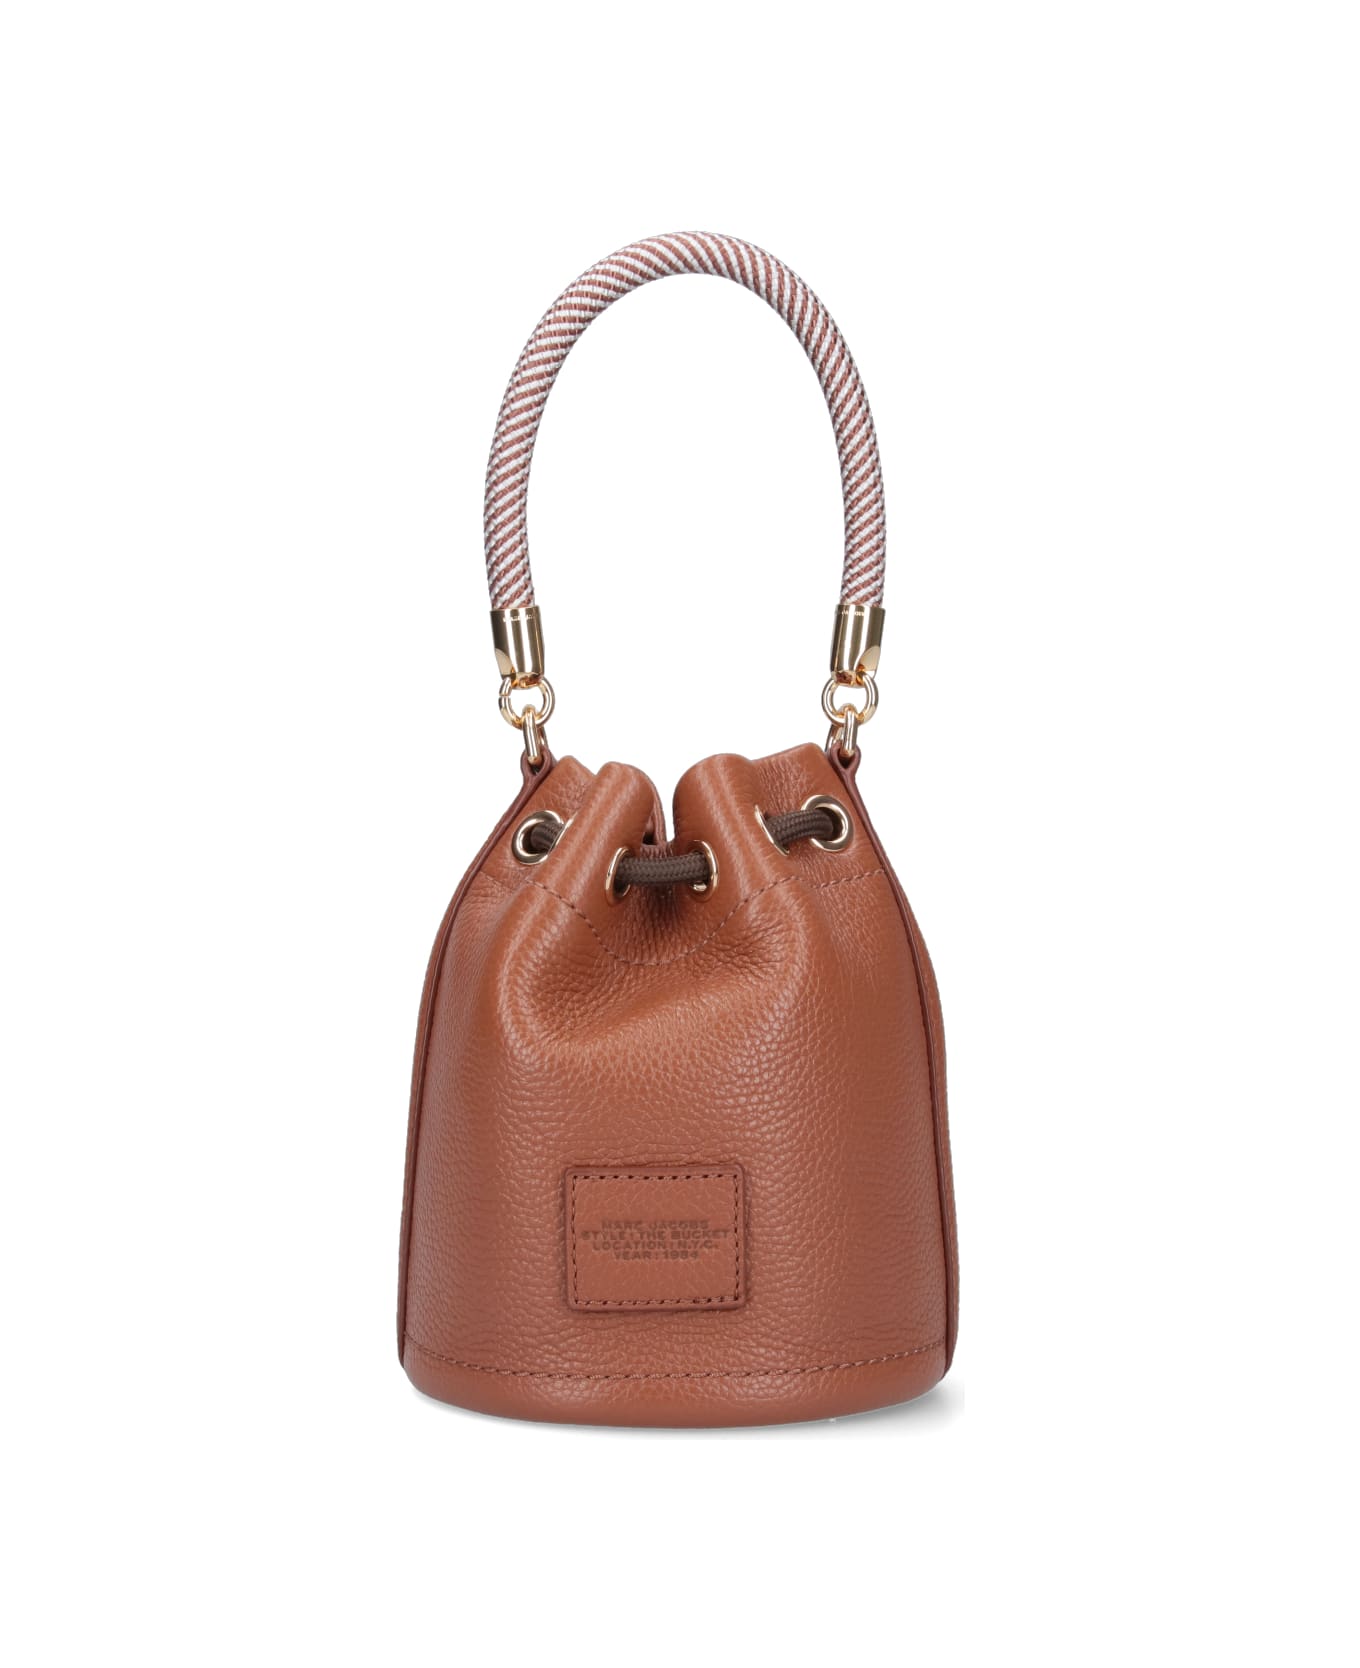 Marc Jacobs Mini Bag "the Leather Bucket" - Brown